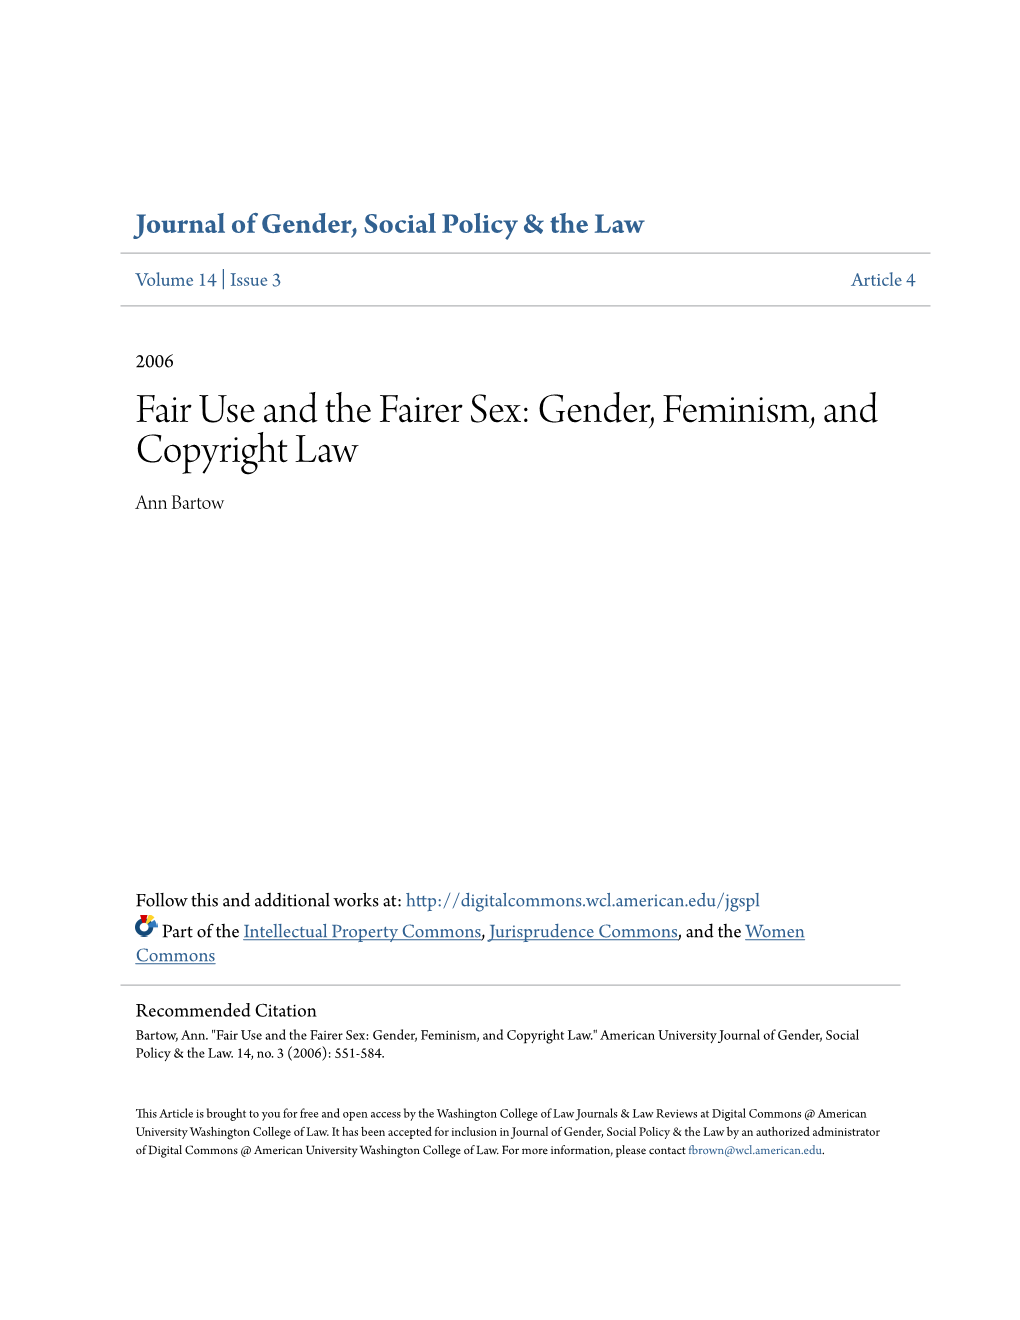 Fair Use and the Fairer Sex: Gender, Feminism, and Copyright Law Ann Bartow